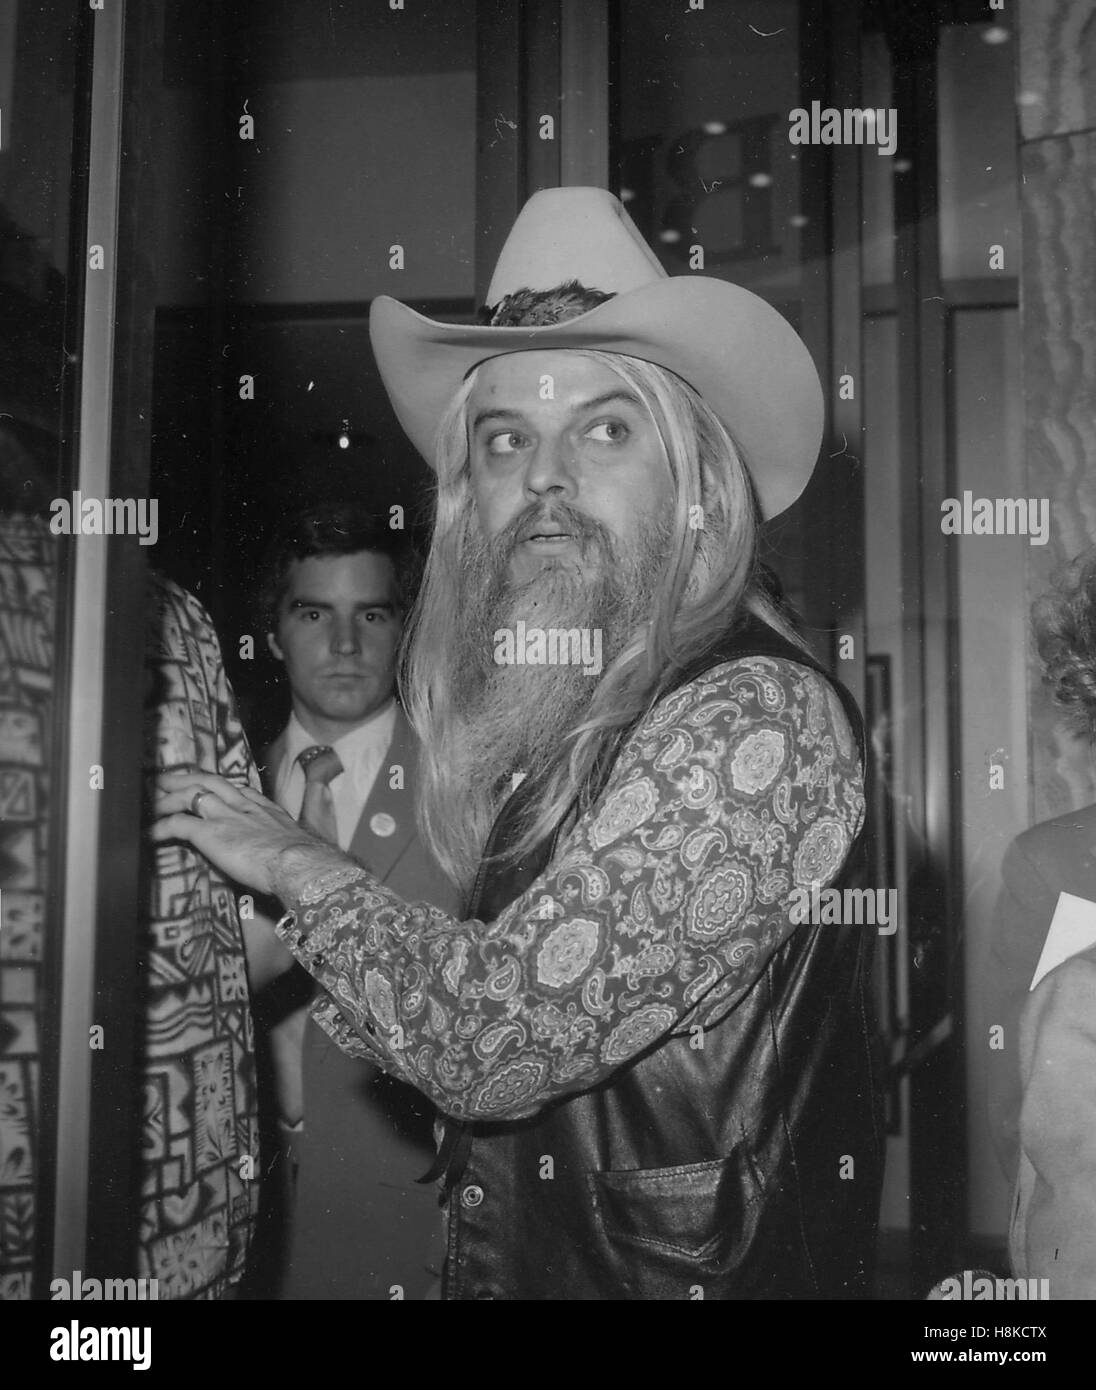 File. 13th Nov, 2016. LEON RUSSELL (April 2, 1942 - Nov. 13, 2016) was an American musician and songwriter, who recorded as a session musician, sideman, and solo musician who was inducted into the Rock and Roll Hall of Fame in 2010. Russell died in his sleep in Nashville at the age of 74, after suffering a heart attack in July 2016. PICTURED: LEON RUSSELL in the 1980's. (Credit Image: © Globe Photos/ZUMApress.com) Stock Photo